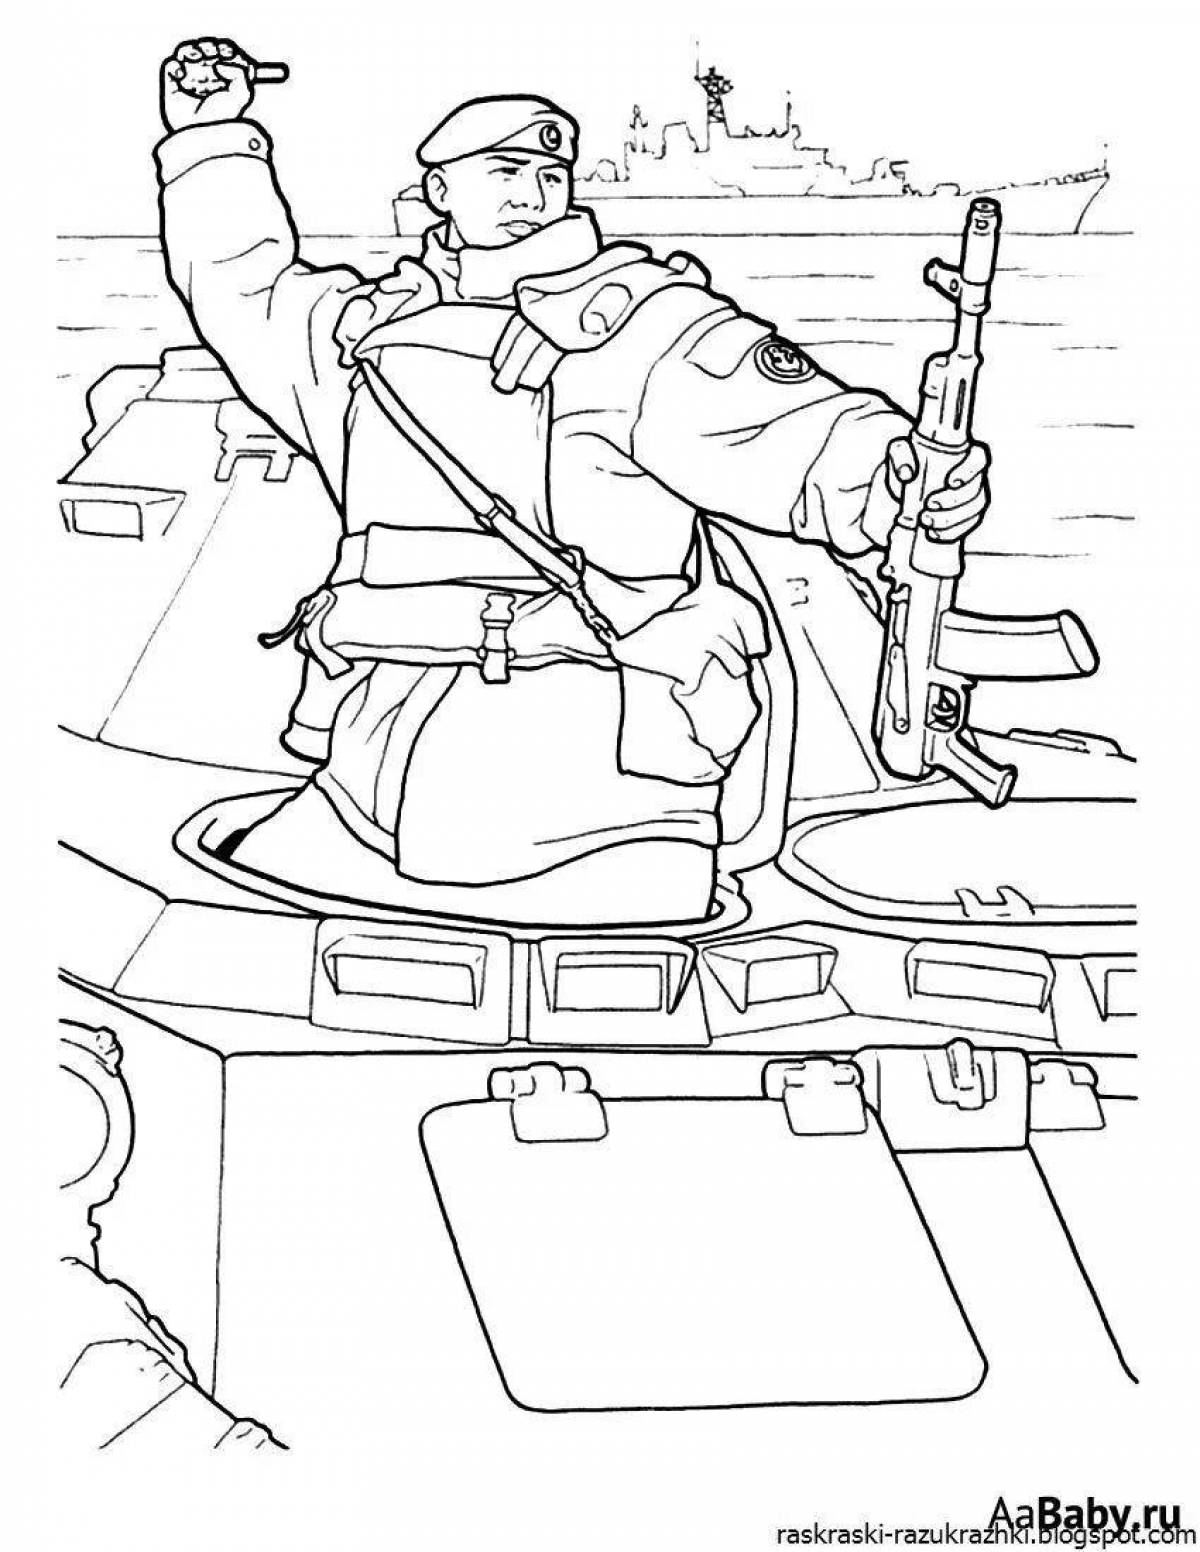 Royal coloring pages soldiers of different branches of the military for children